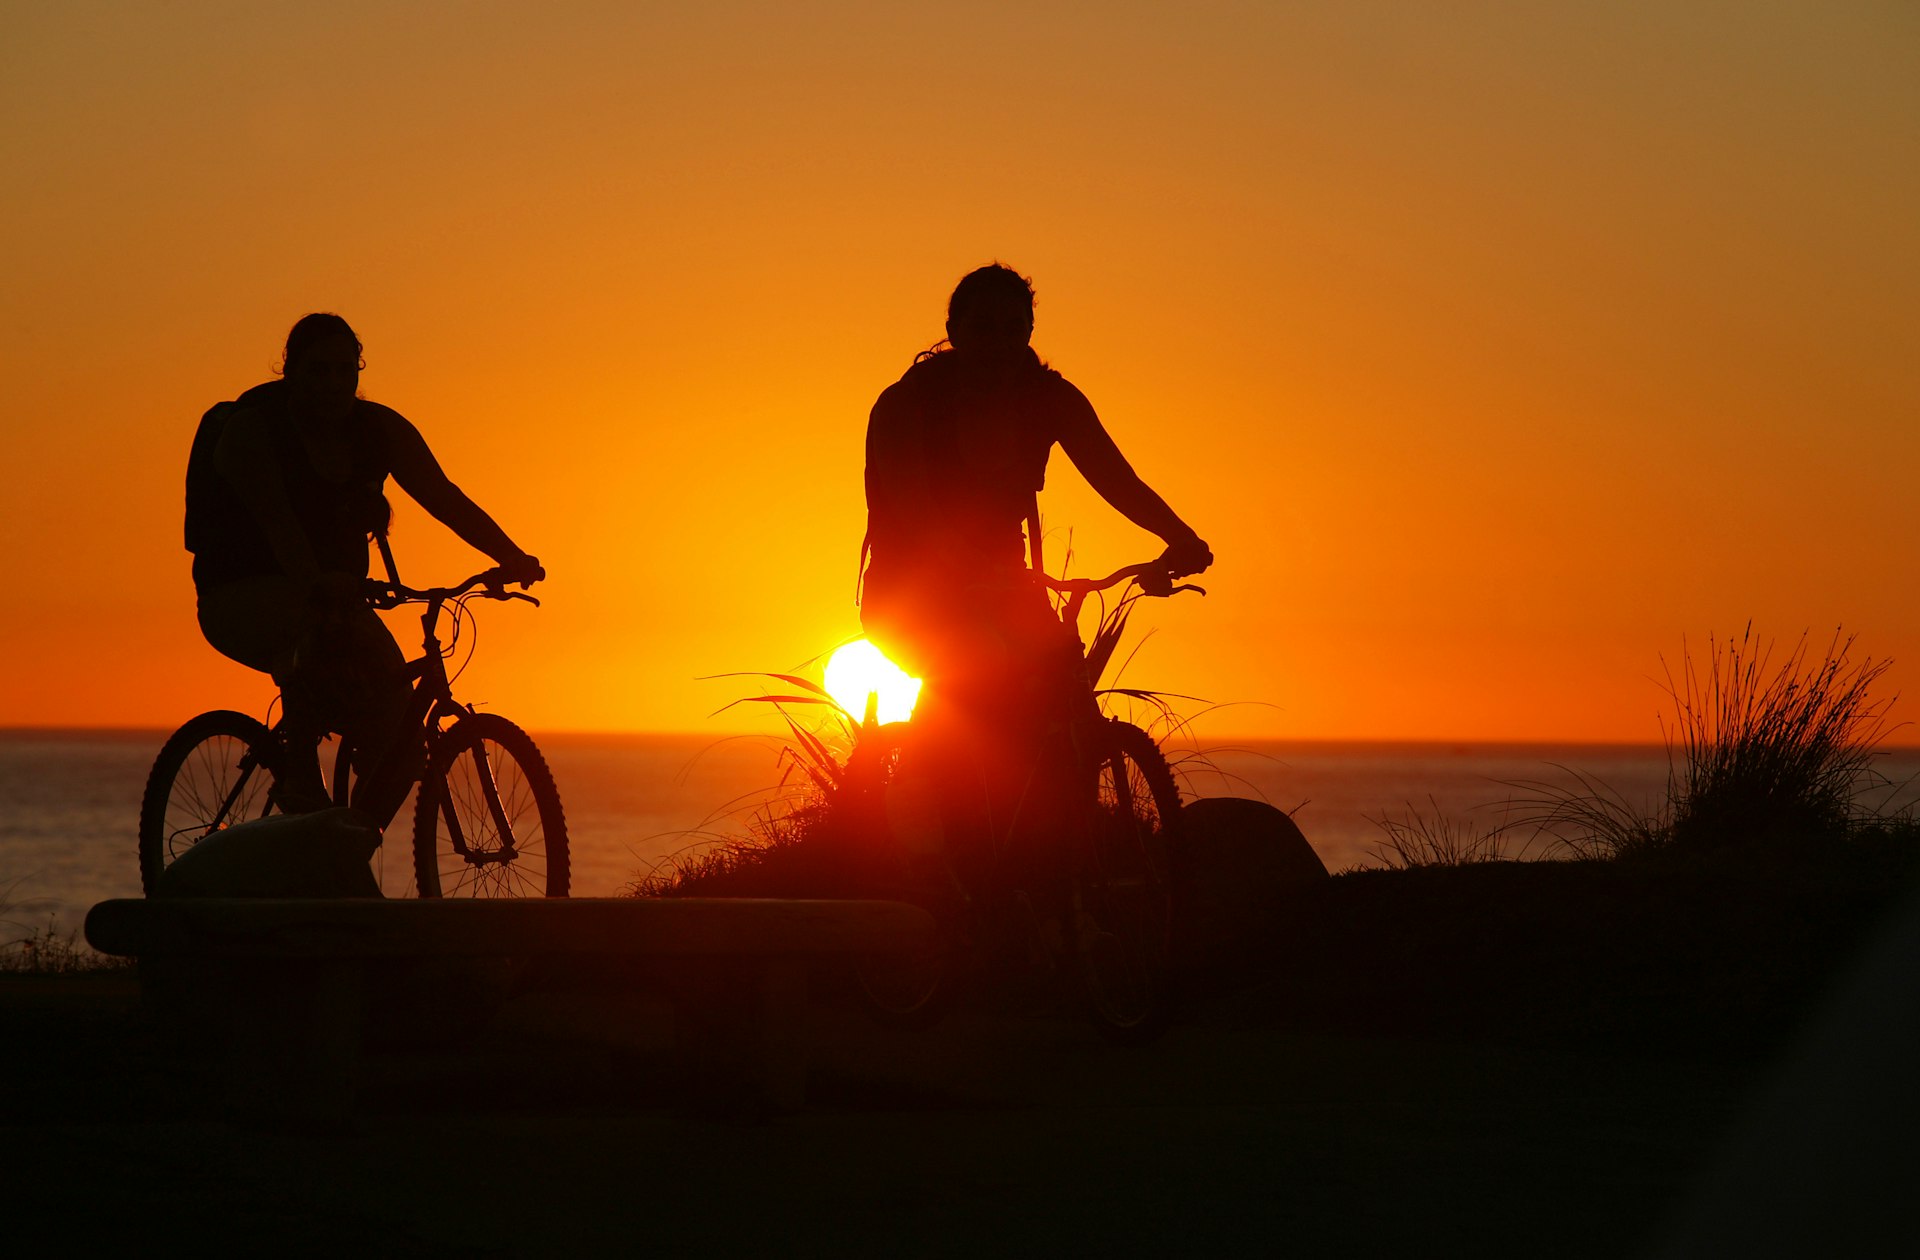 Two people in silhouette ride on bikes during sunset near a large body of water. 